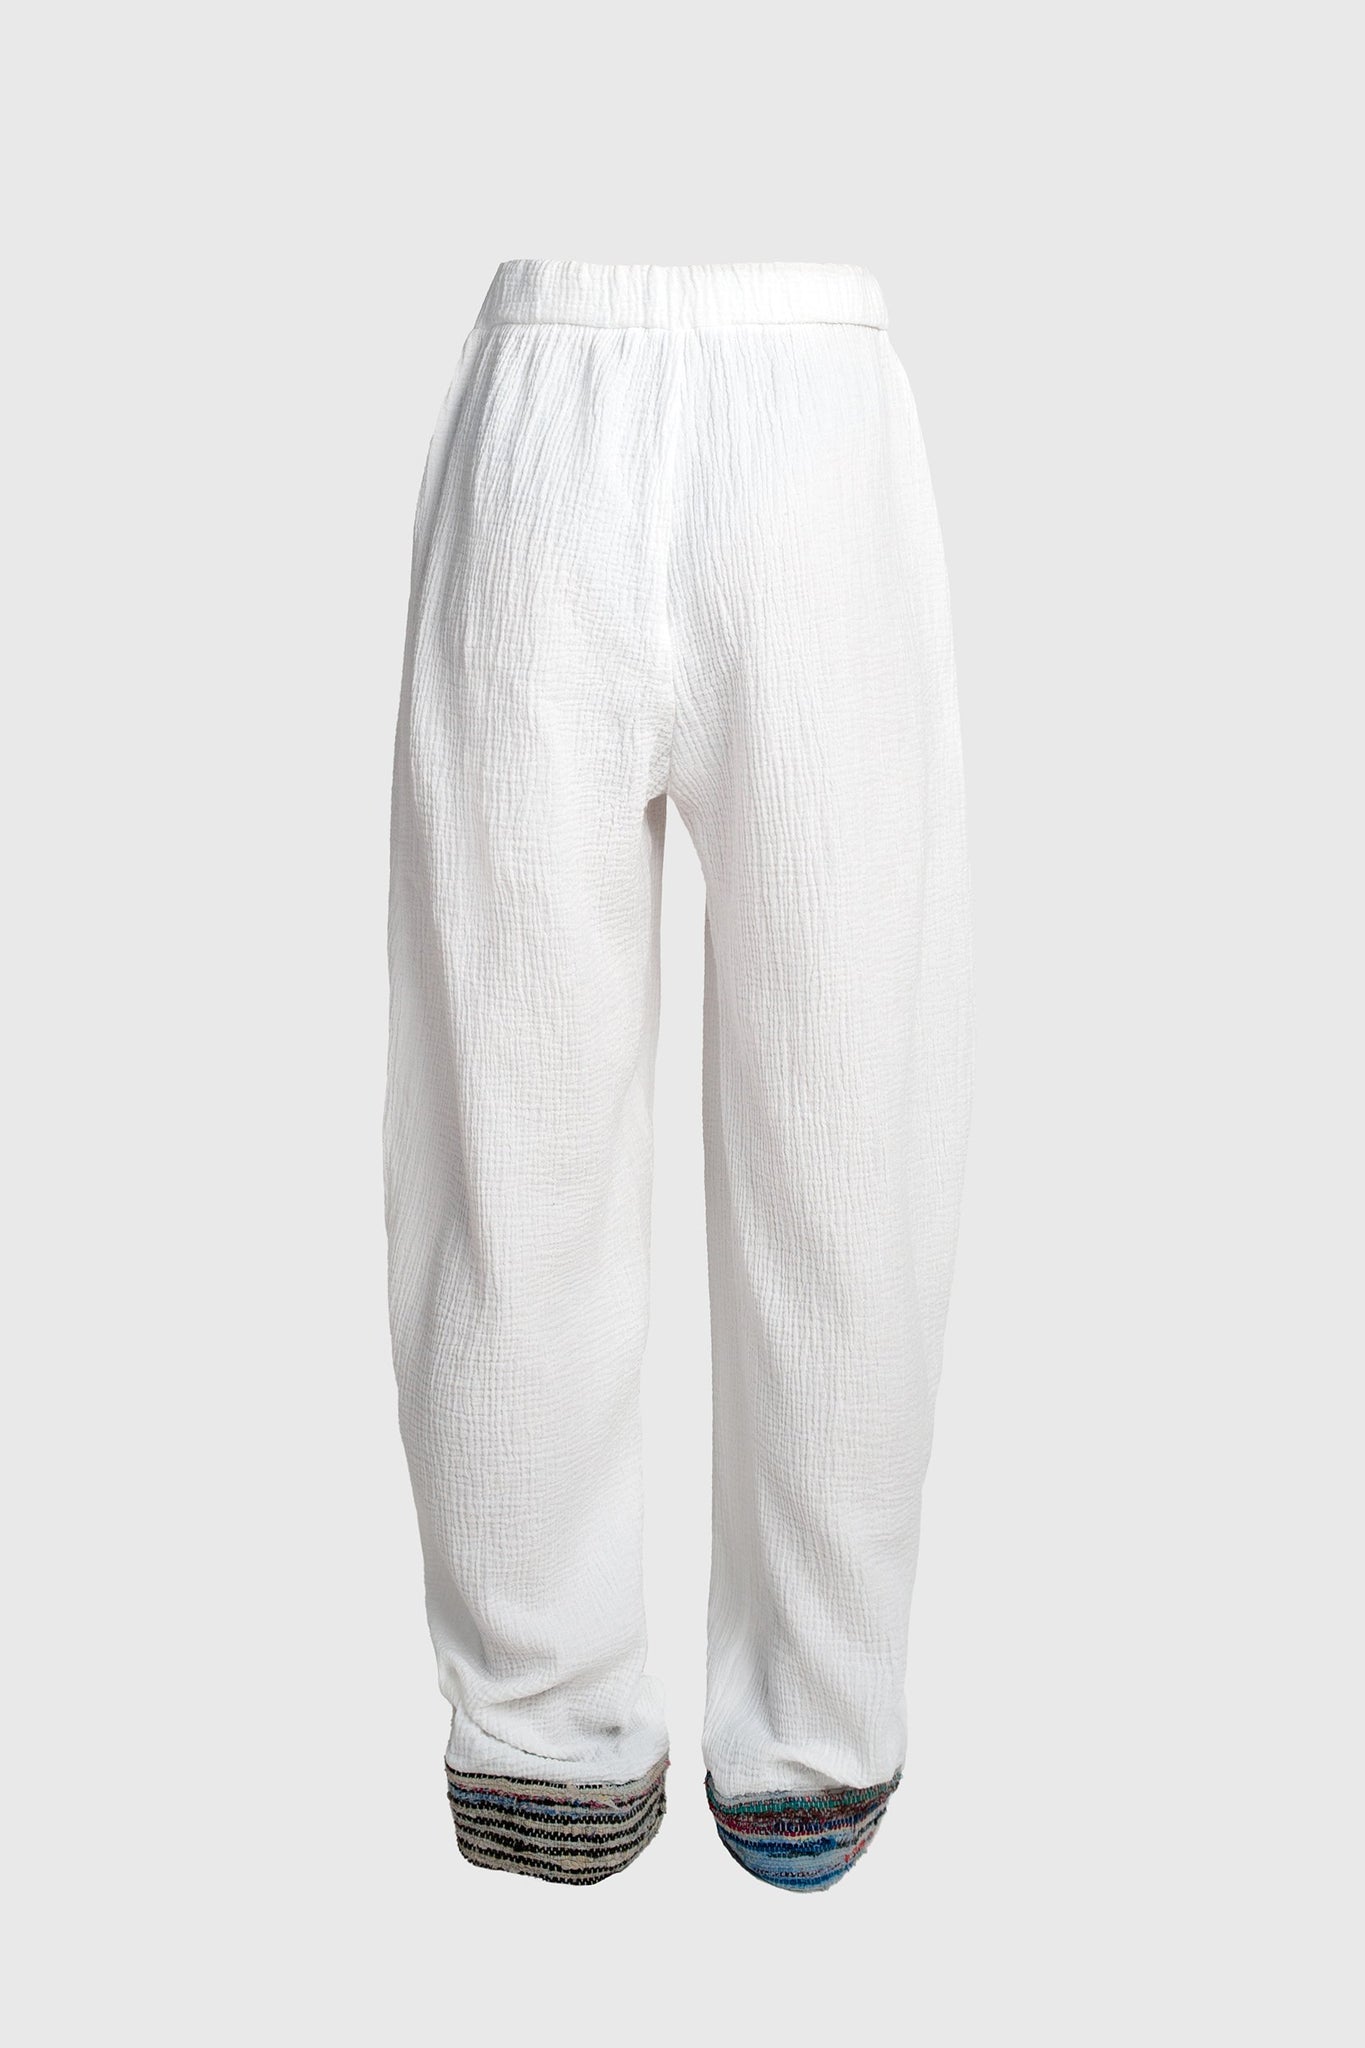 Horse Pants - Wrinkled White Cotton